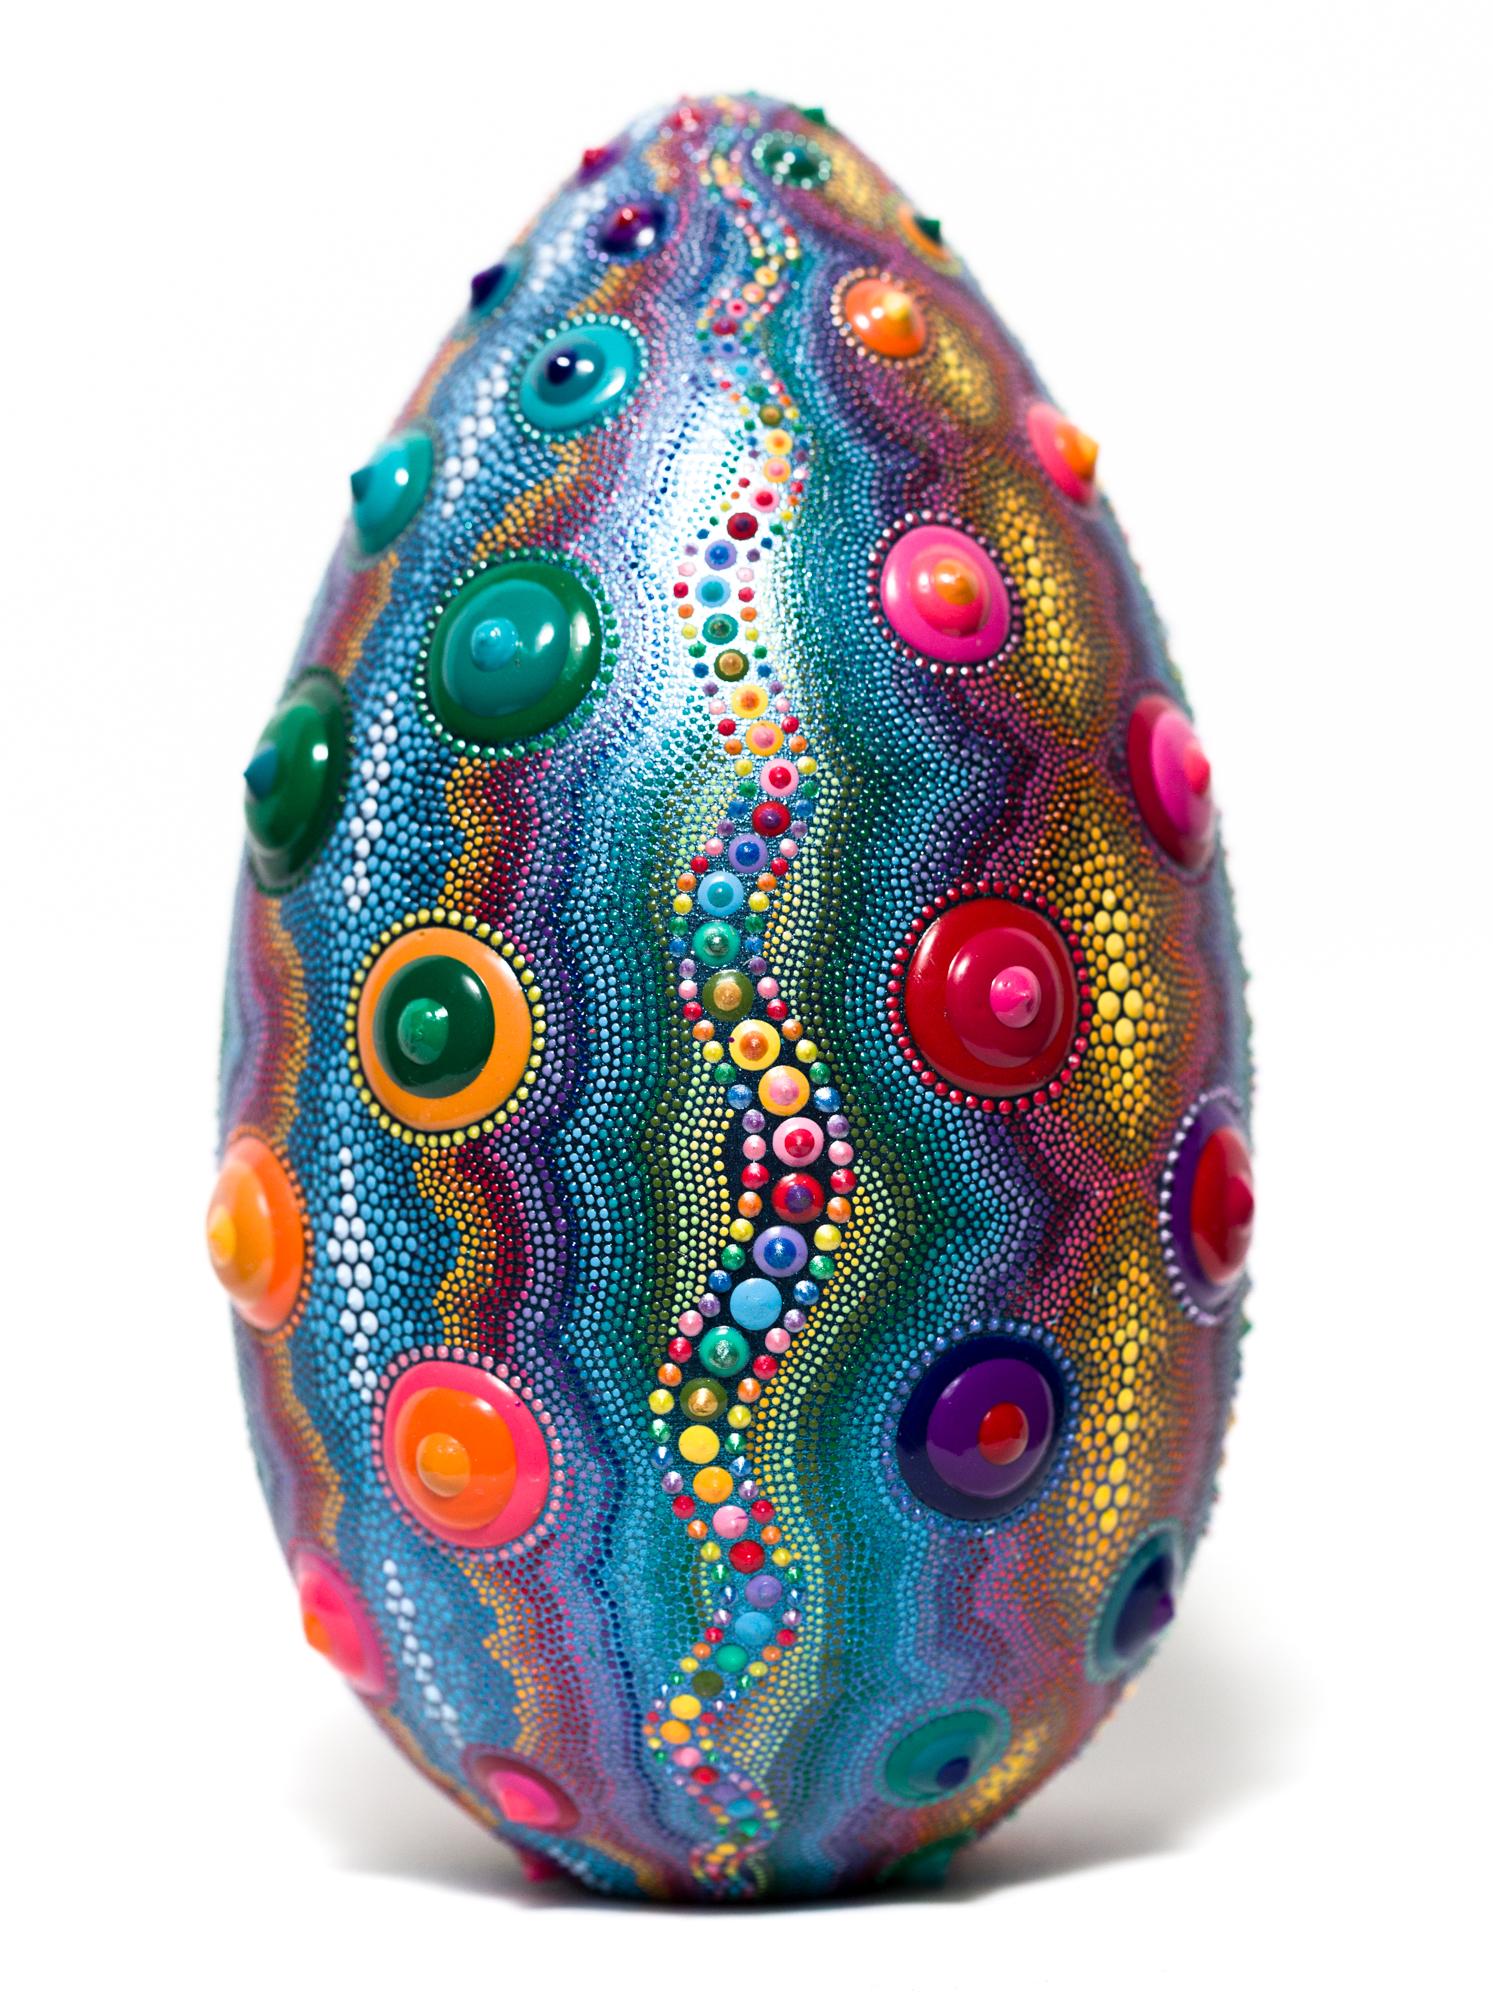 "Candy Urchin Egg", Egg Motif, Patterns, Bright colors, texture, dimensional